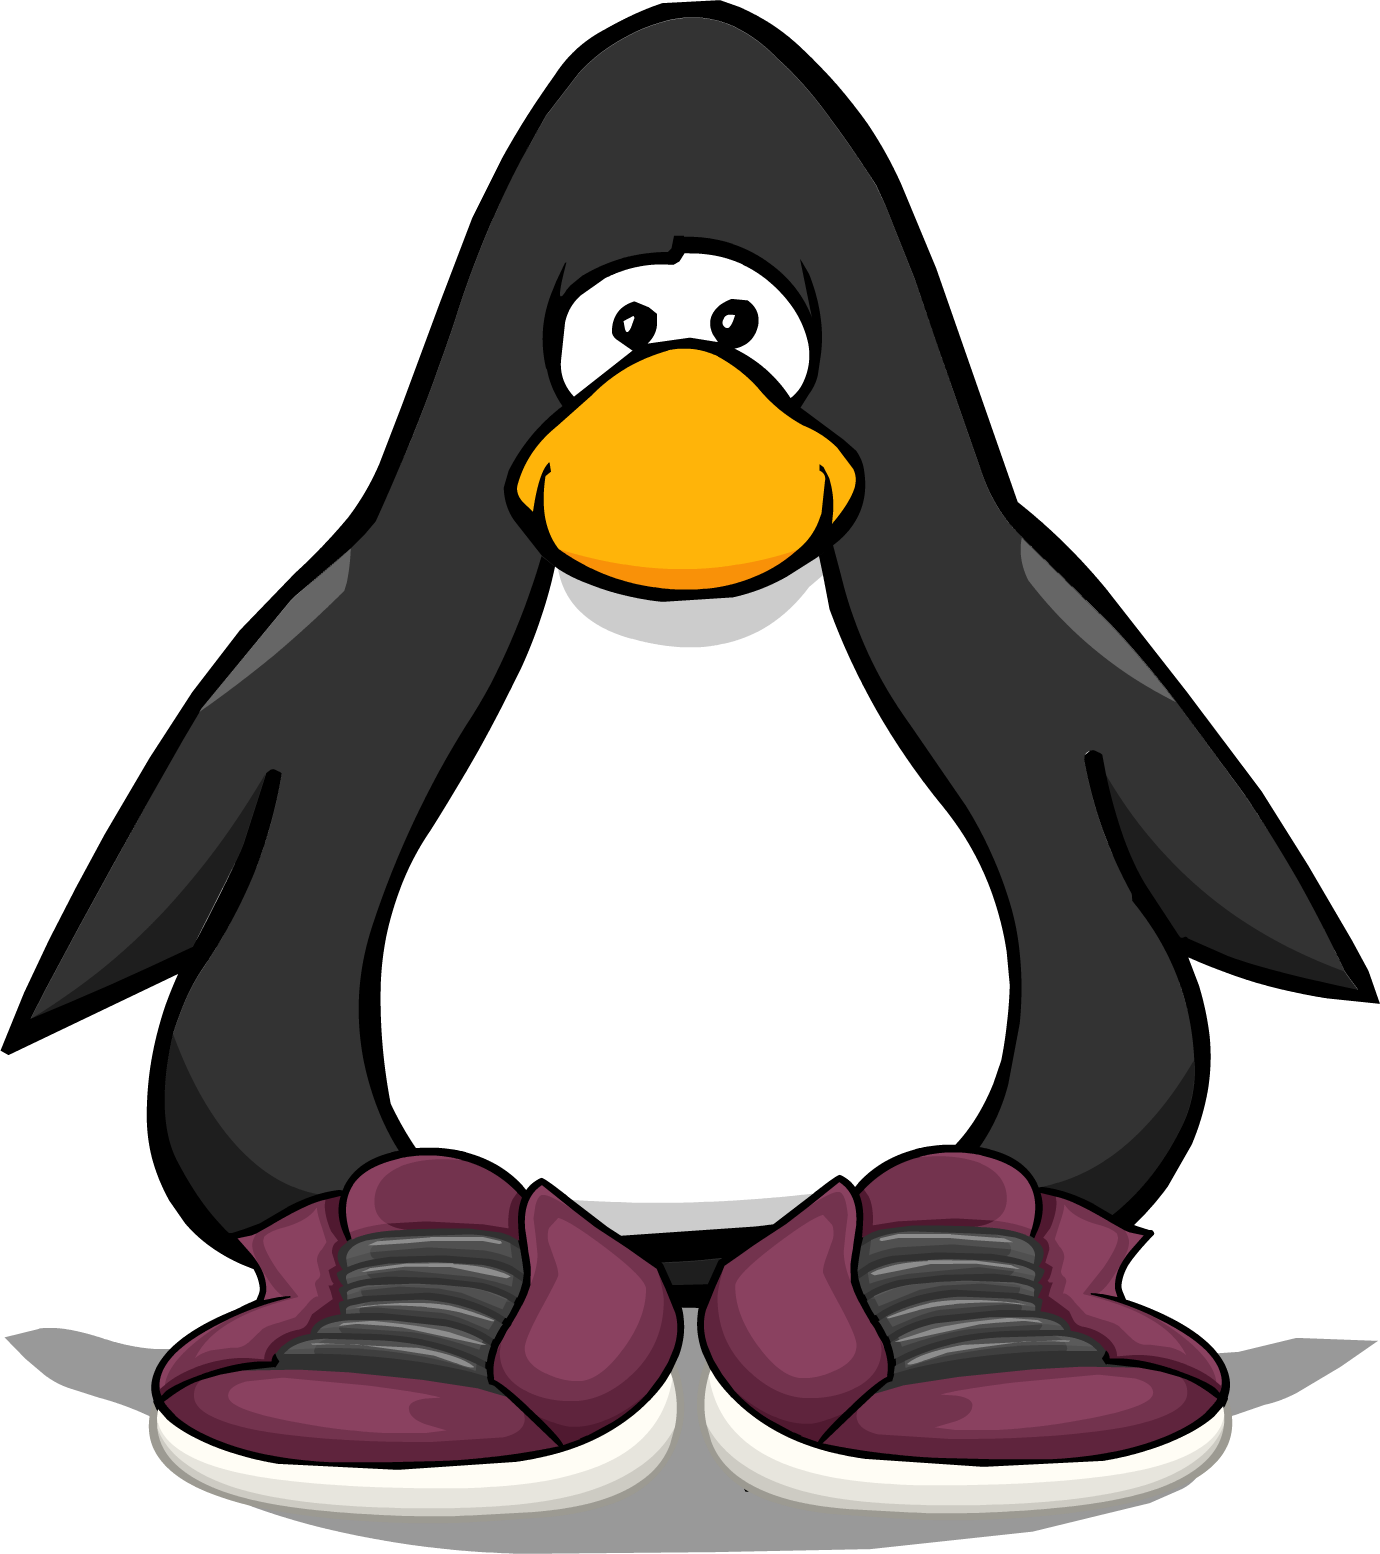 Hipster Hightops Pc - Club Penguin Bling Bling Necklace (1380x1554)